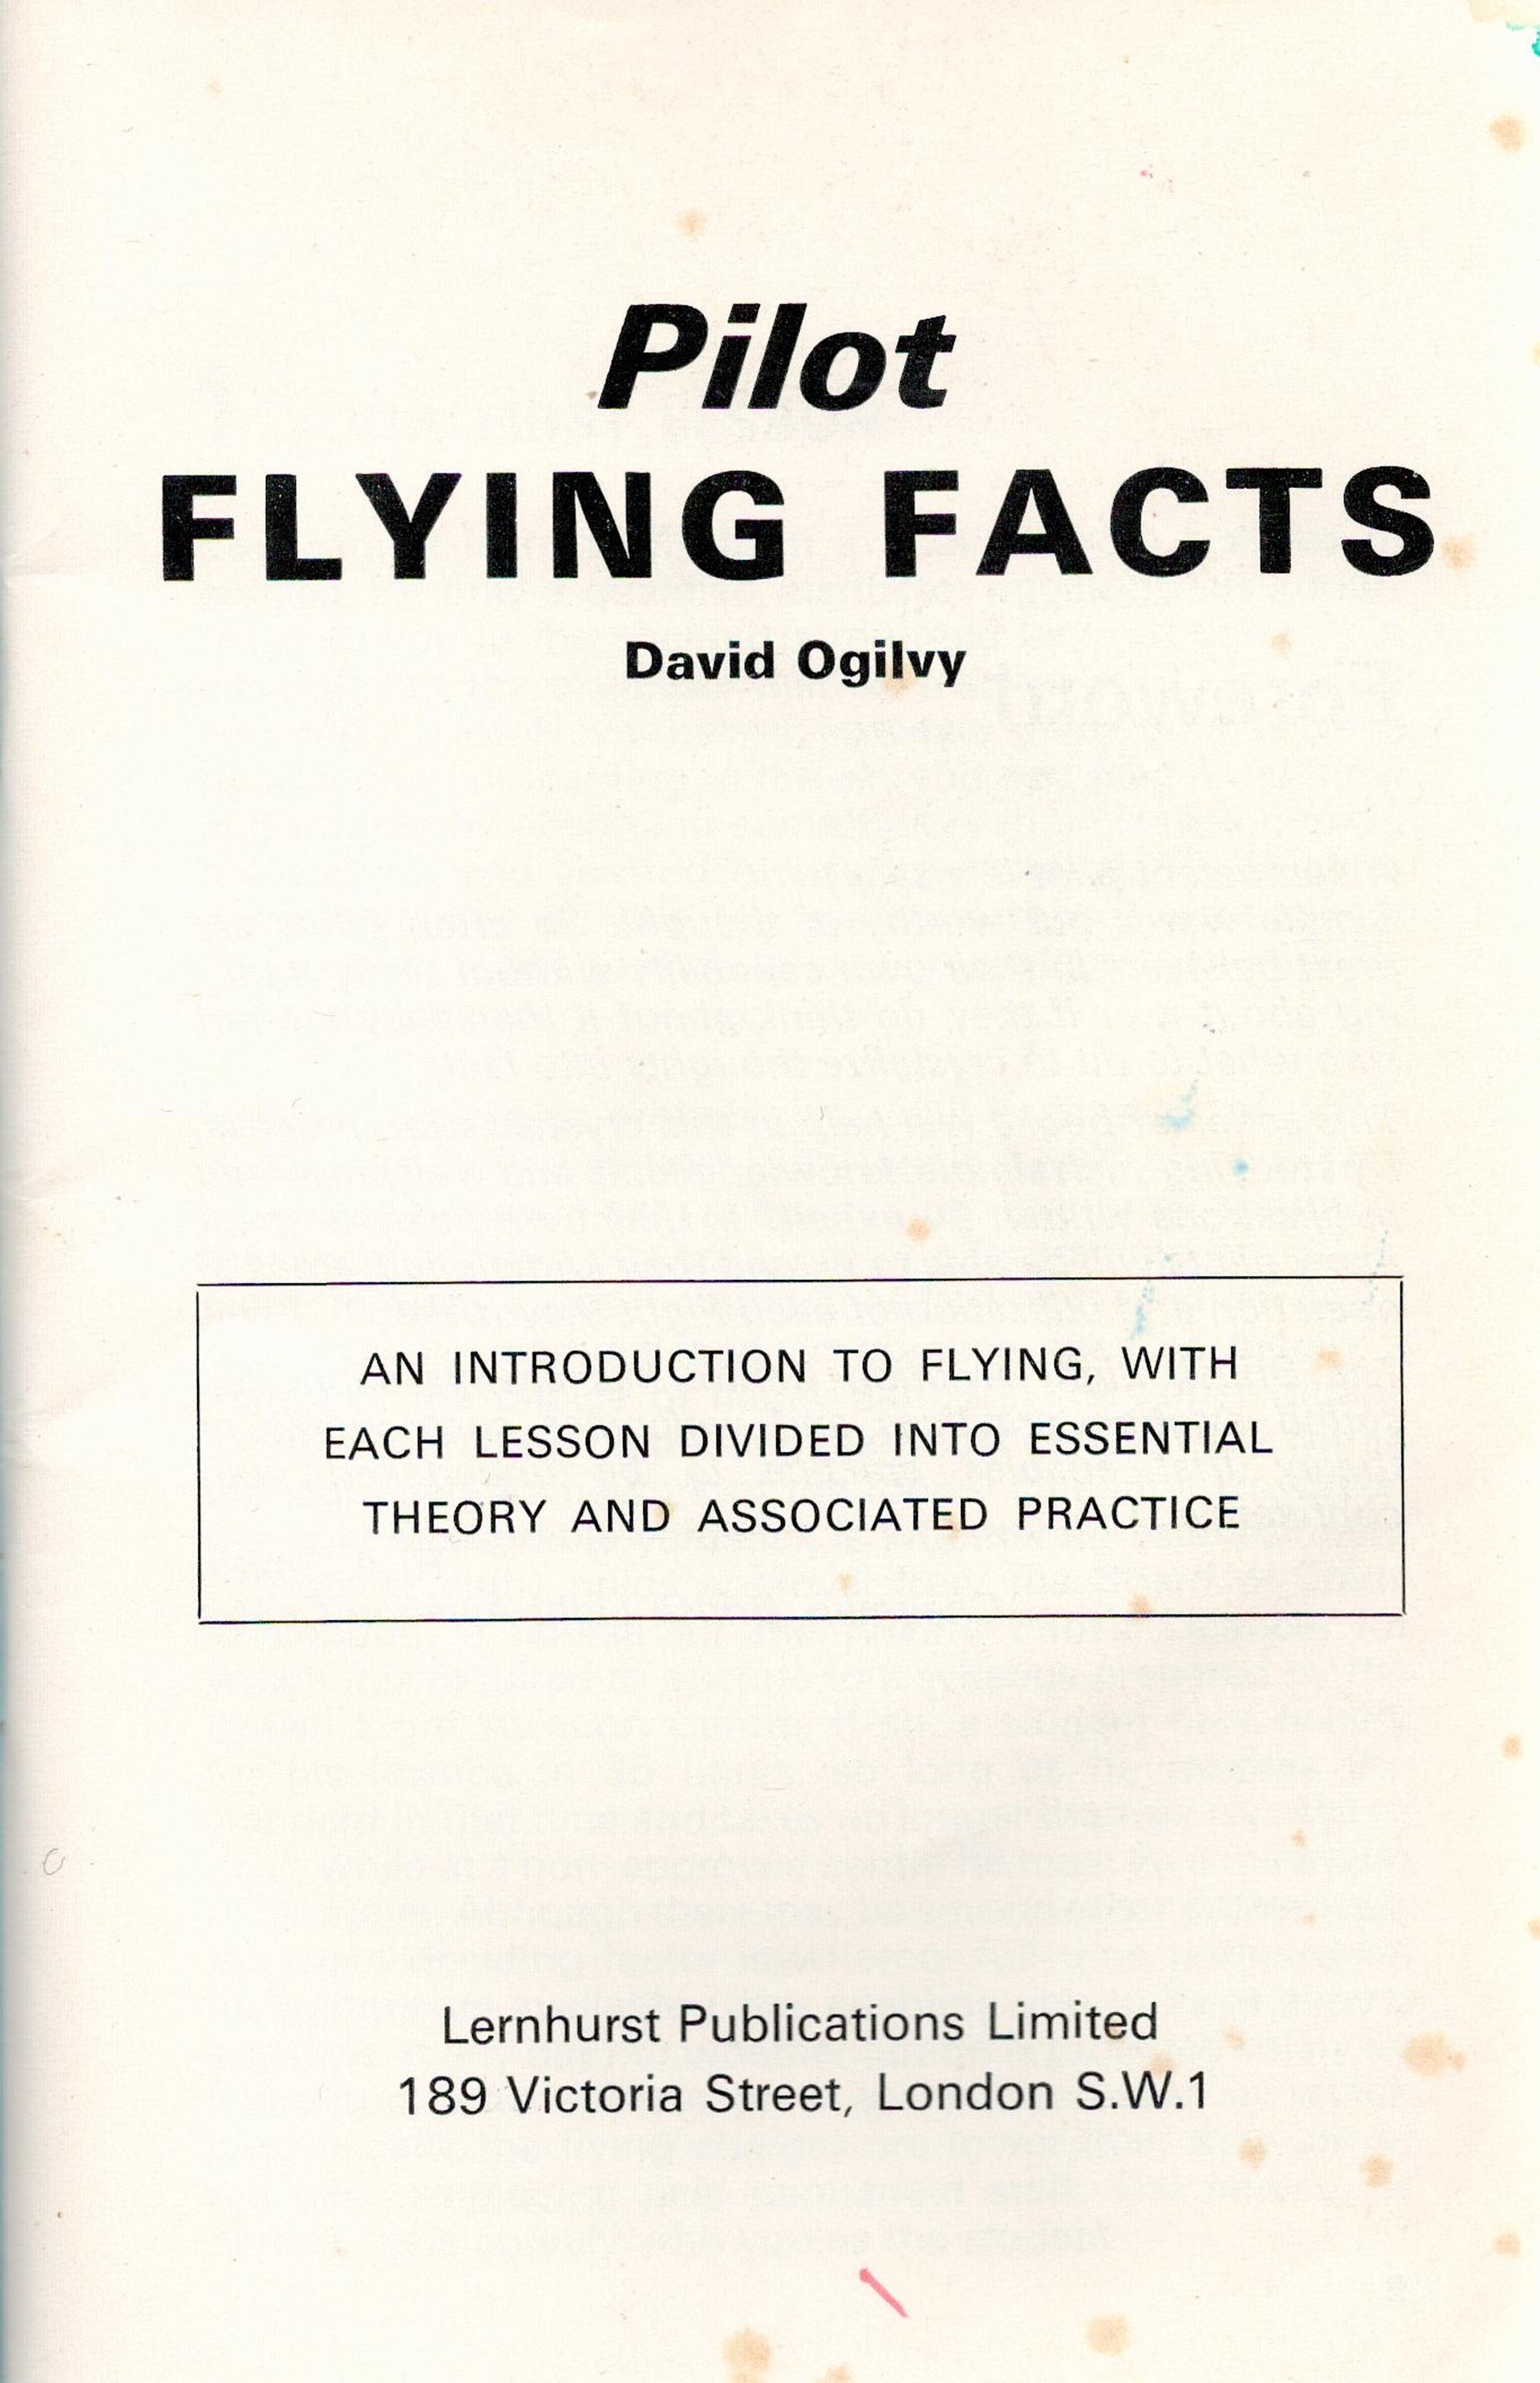 WW2 Two Information Booklets, Pilot Navigation by RJ Thornborough and Pilot Flying Facts by David - Image 3 of 3